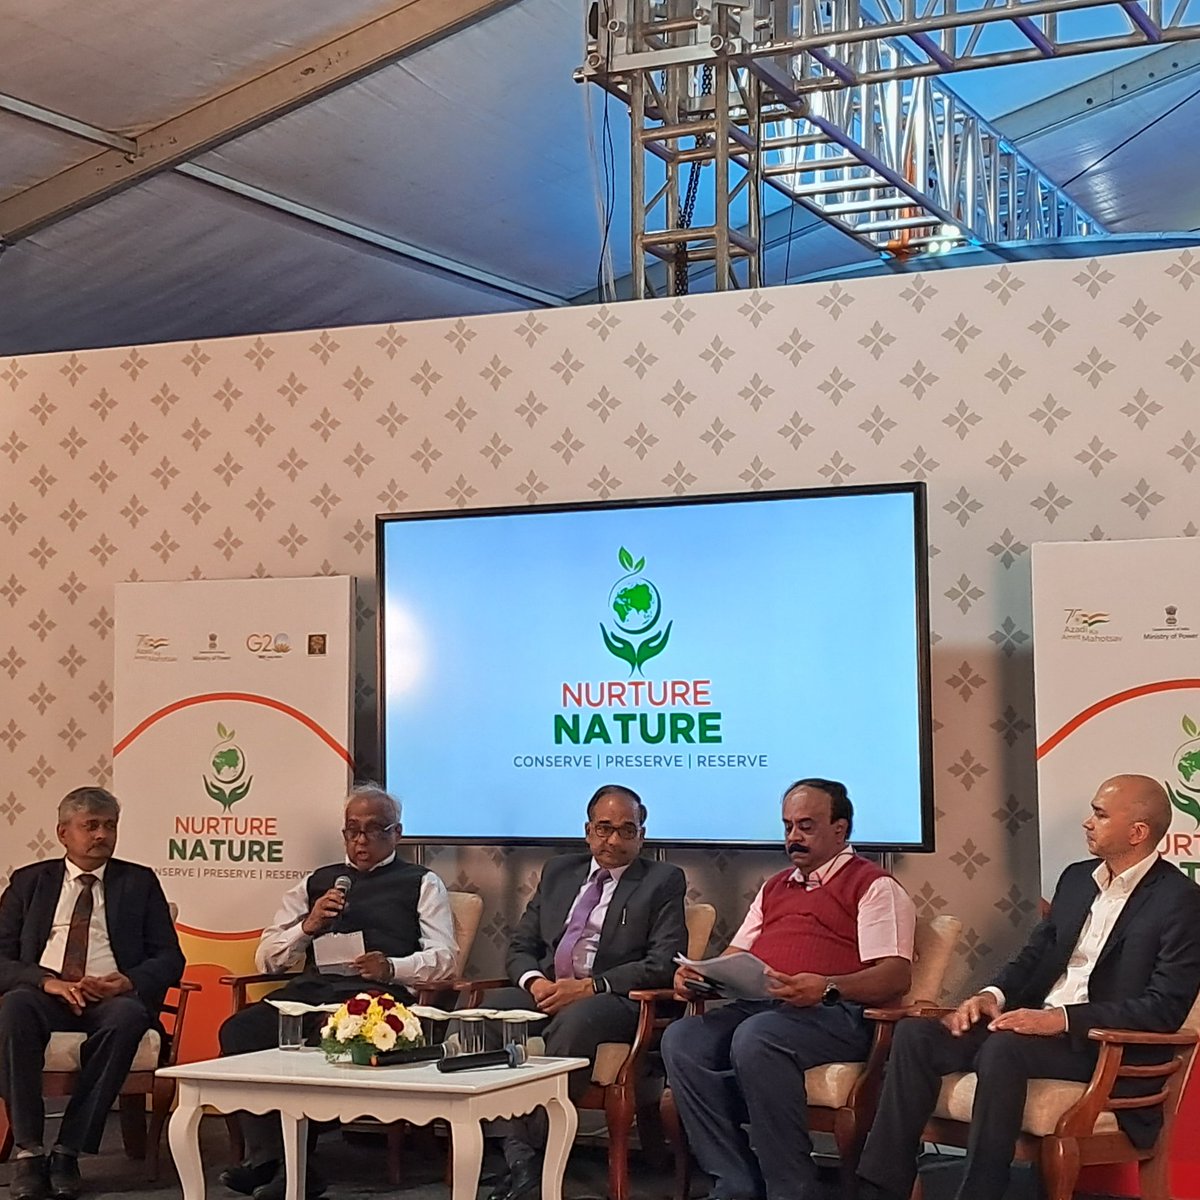 A conference on Energy Efficiency, Industry Low Carbon Transition & Responsible Consumption at the #NurtureNature exhibition in #Bengaluru was chaired by Hon'ble Secretary of Power, Shri Alok Kumar and Shri Sanjiv Nandan Sahai, Director General, Power Foundation of India.